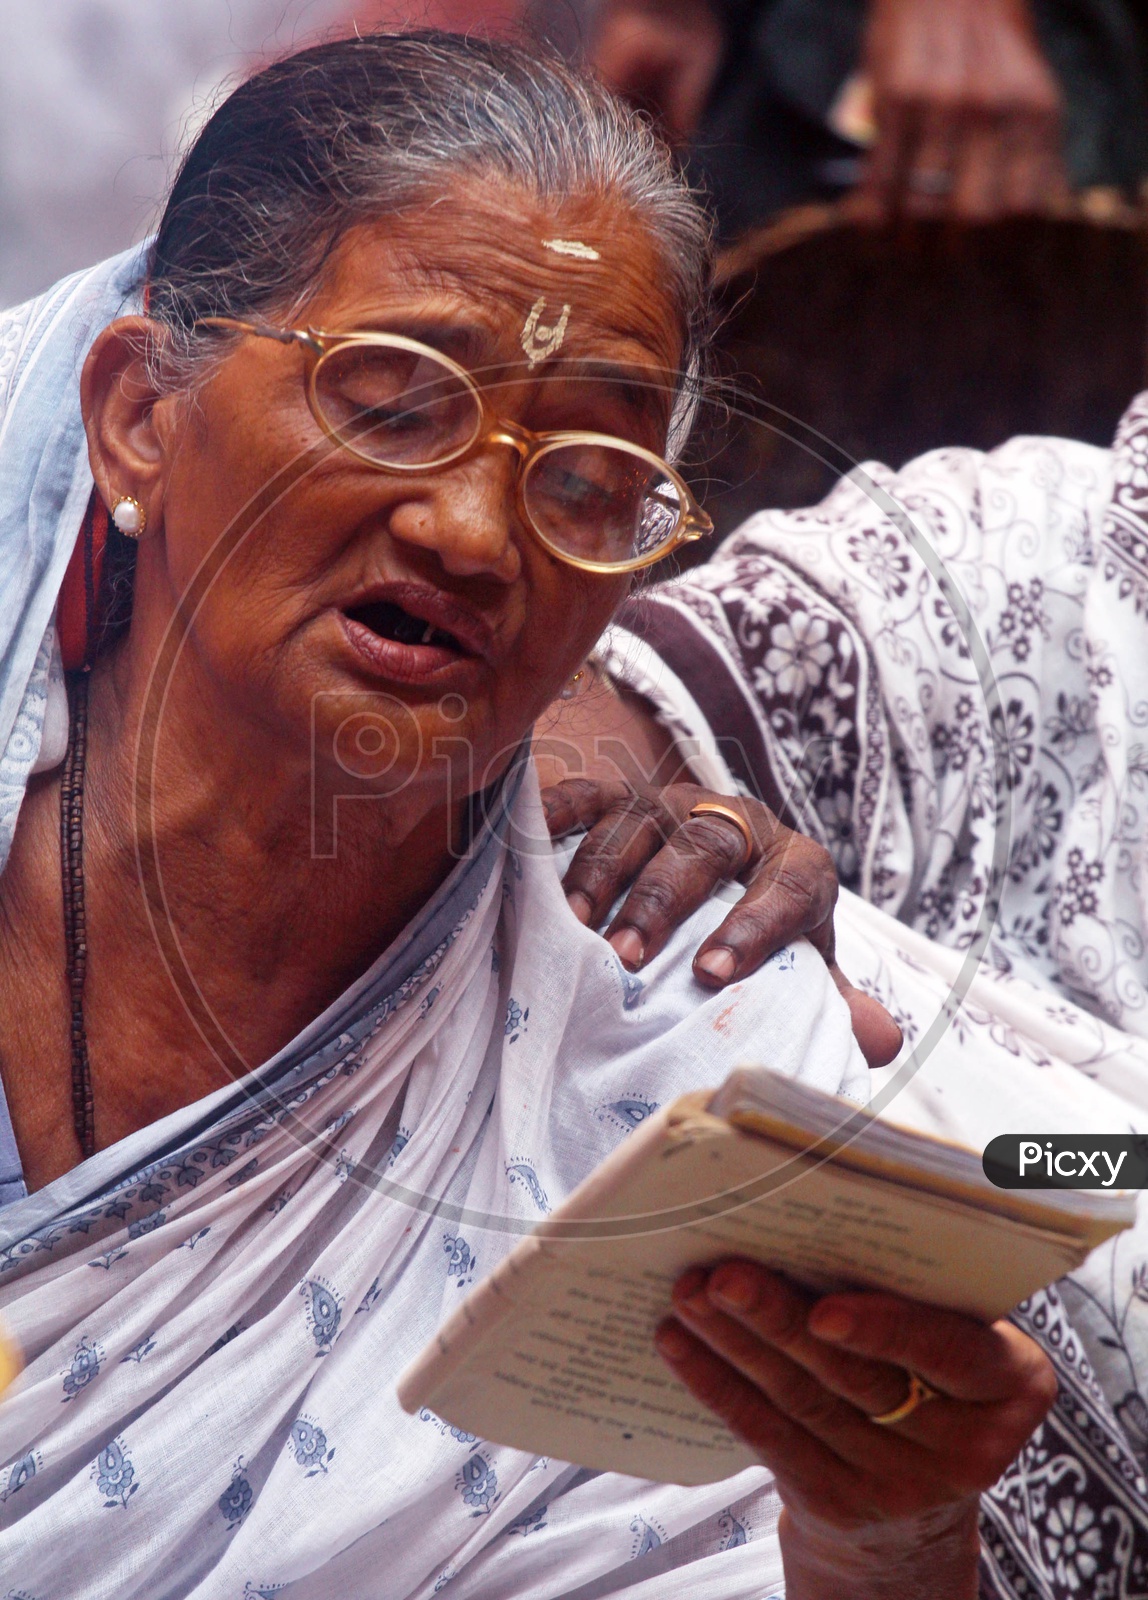 A Hindu widow chanting mantras from a book while worshiping Tulsi Devi, a goodess, worships in the form of plant.